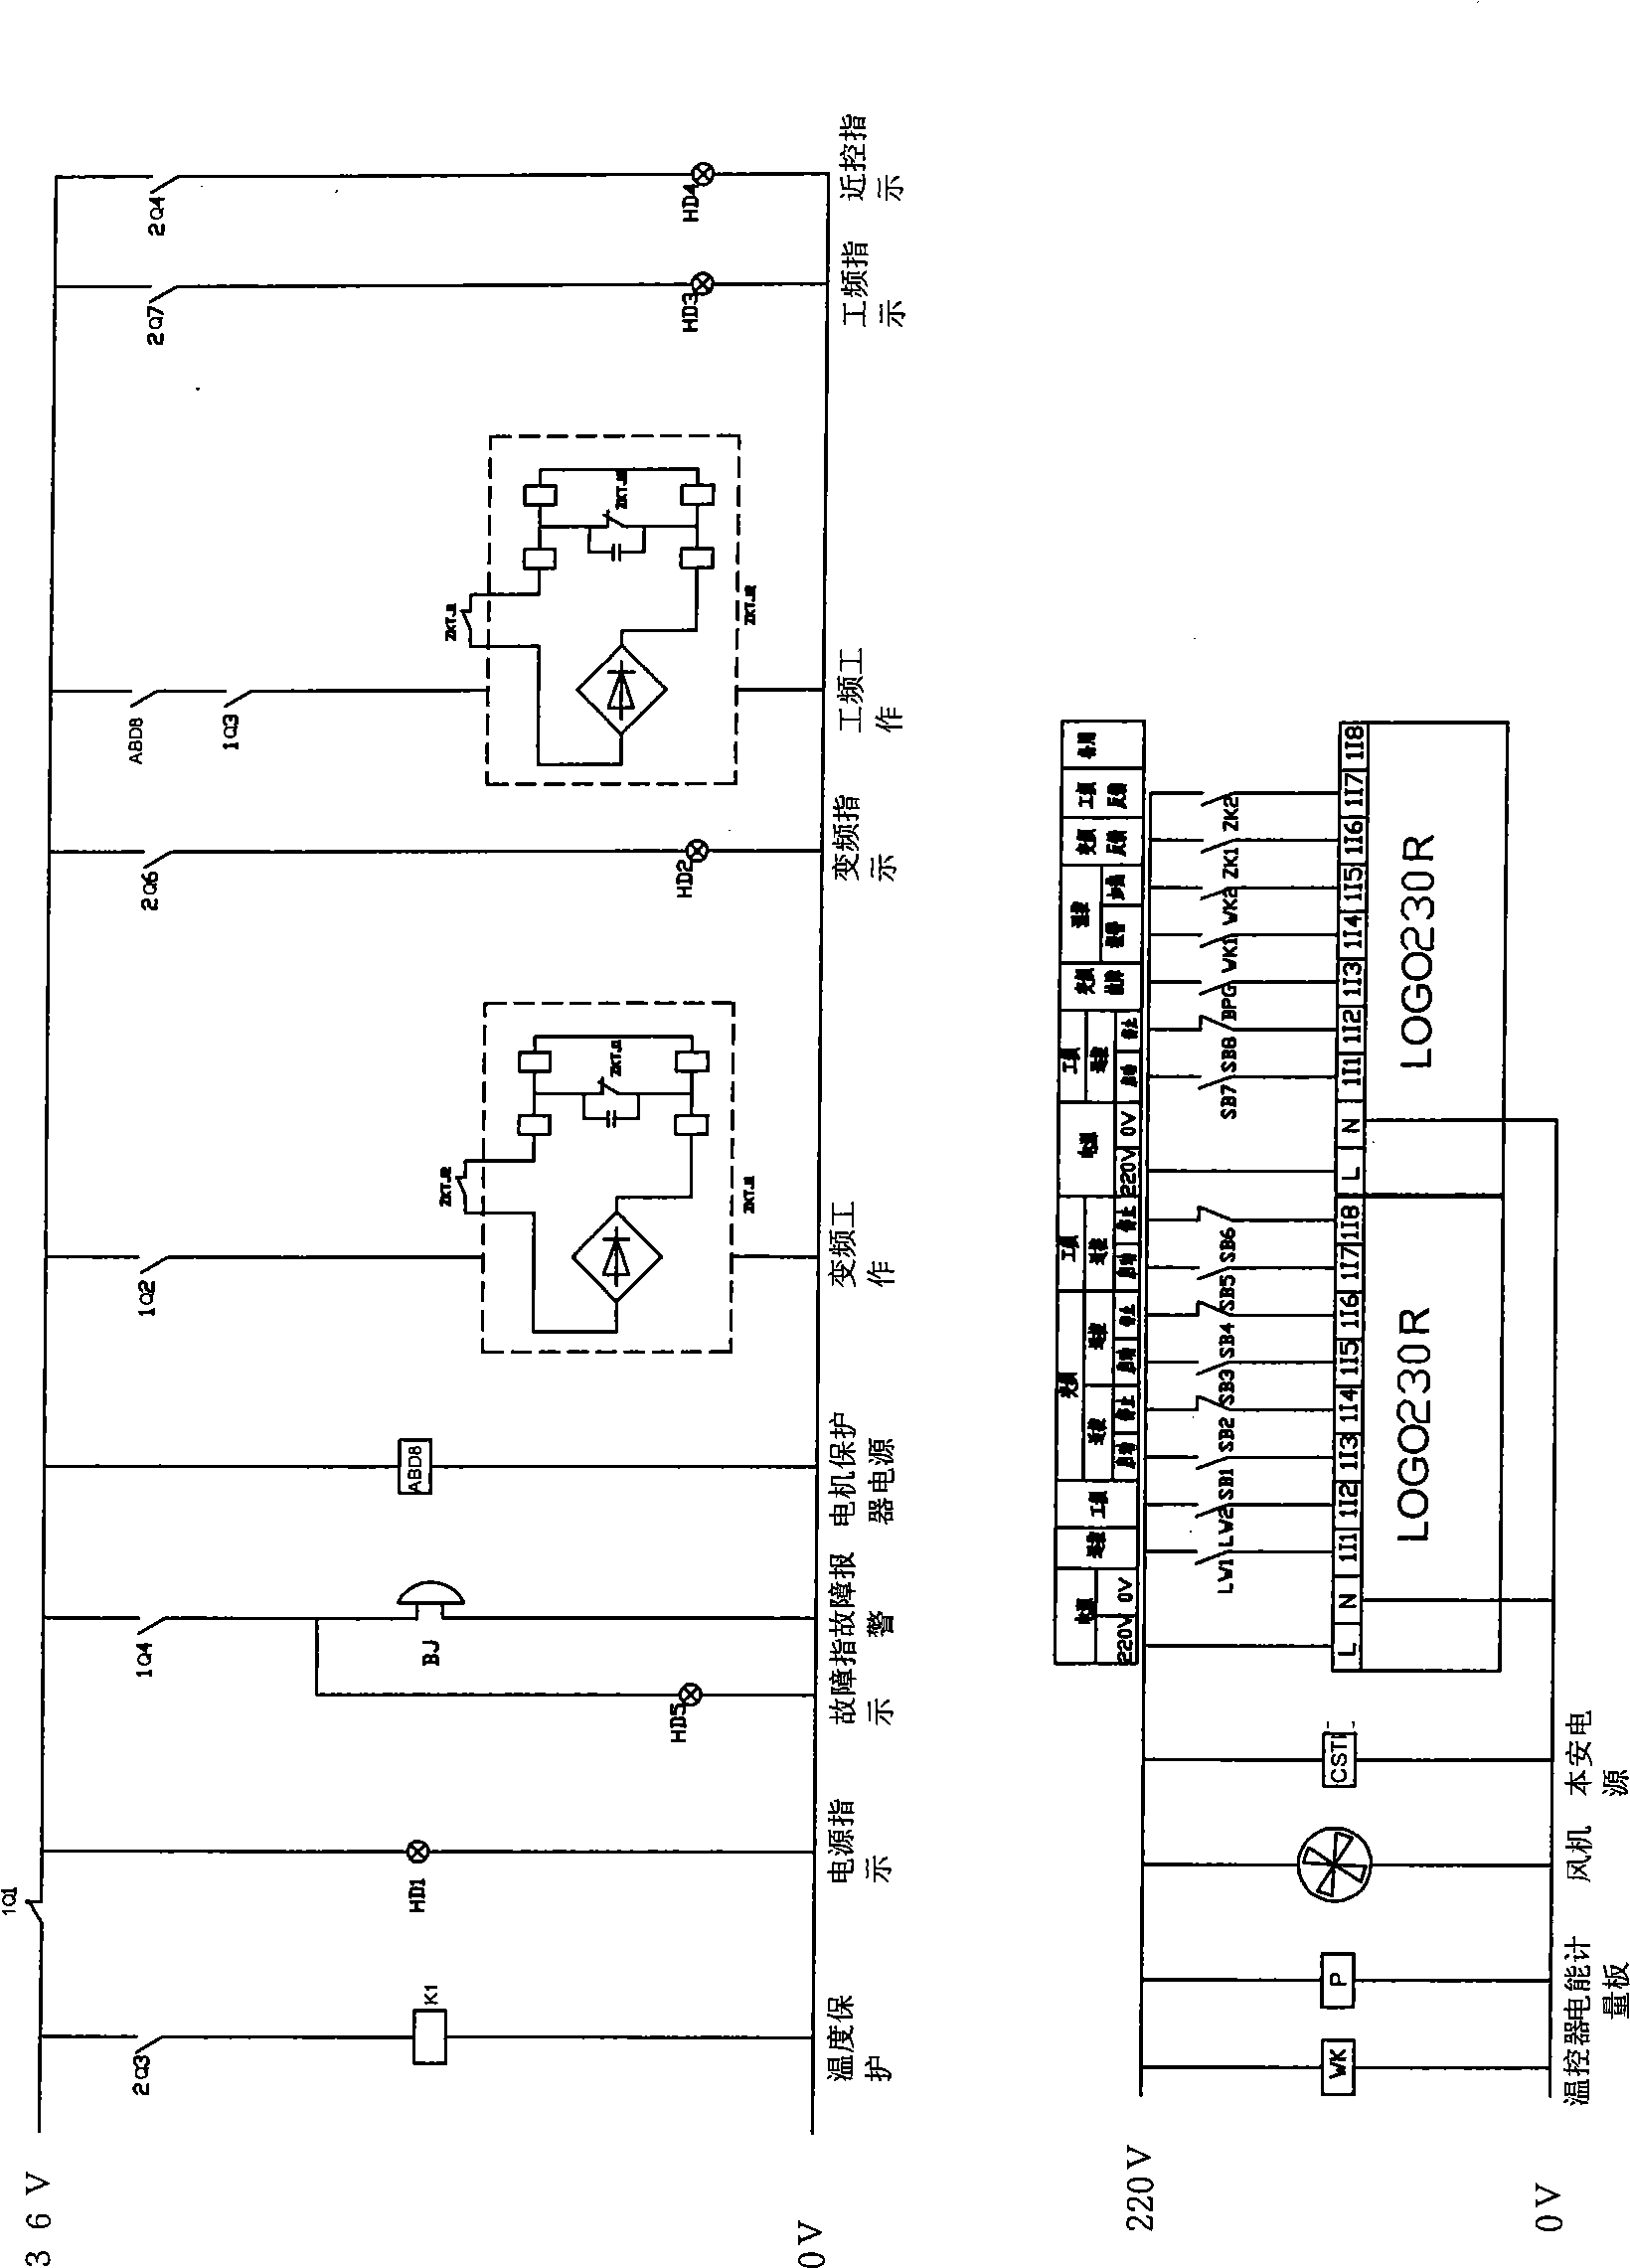 Mine flameproof and intrinsic safety type variable frequency speed control device